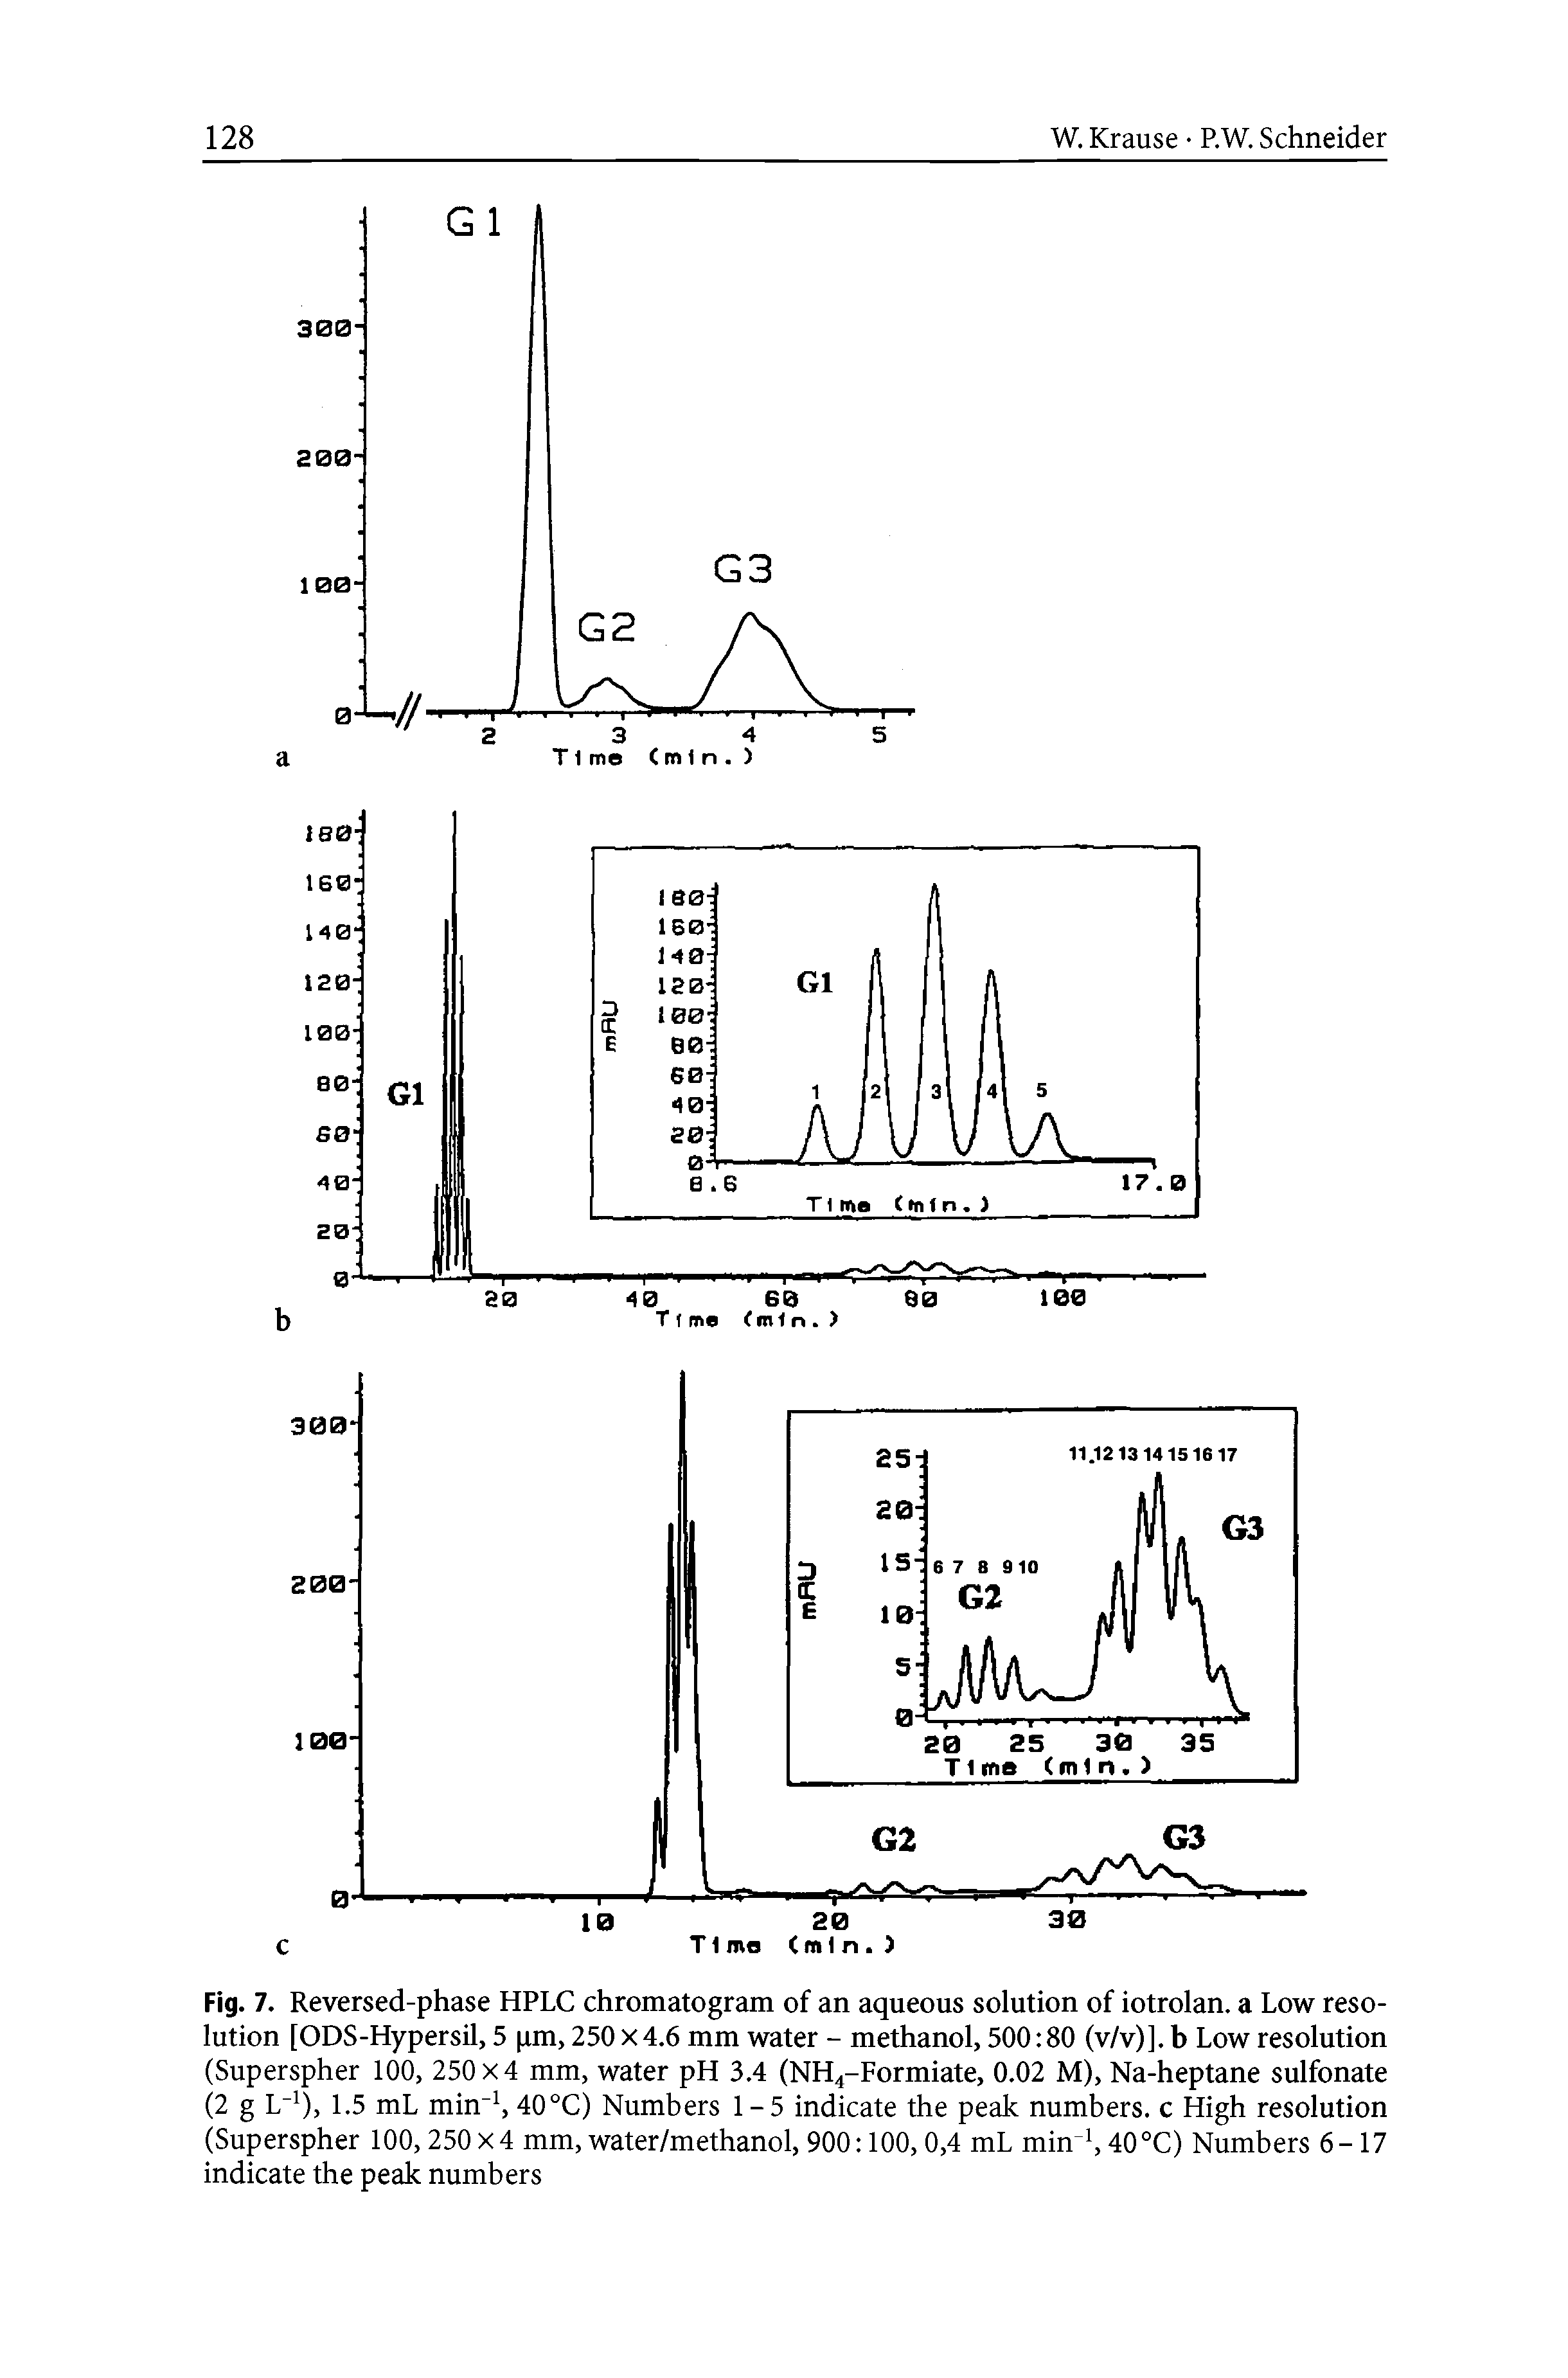 Fig. 7. Reversed-phase HPLC chromatogram of an aqueous solution of iotrolan. a Low resolution [ODS-Hypersil, 5 pm, 250 x 4.6 mm water - methanol, 500 80 (v/v)]. b Low resolution (Superspher 100, 250x4 mm, water pH 3.4 (NH4-Formiate, 0.02 M), Na-heptane sulfonate (2 g L ), 1.5 mL min 40°C) Numbers 1-5 indicate the peak numbers, c High resolution (Superspher 100, 250x4 mm, water/methanol, 900 100, 0,4 mL min 40°C) Numbers 6-17 indicate the peak numbers...